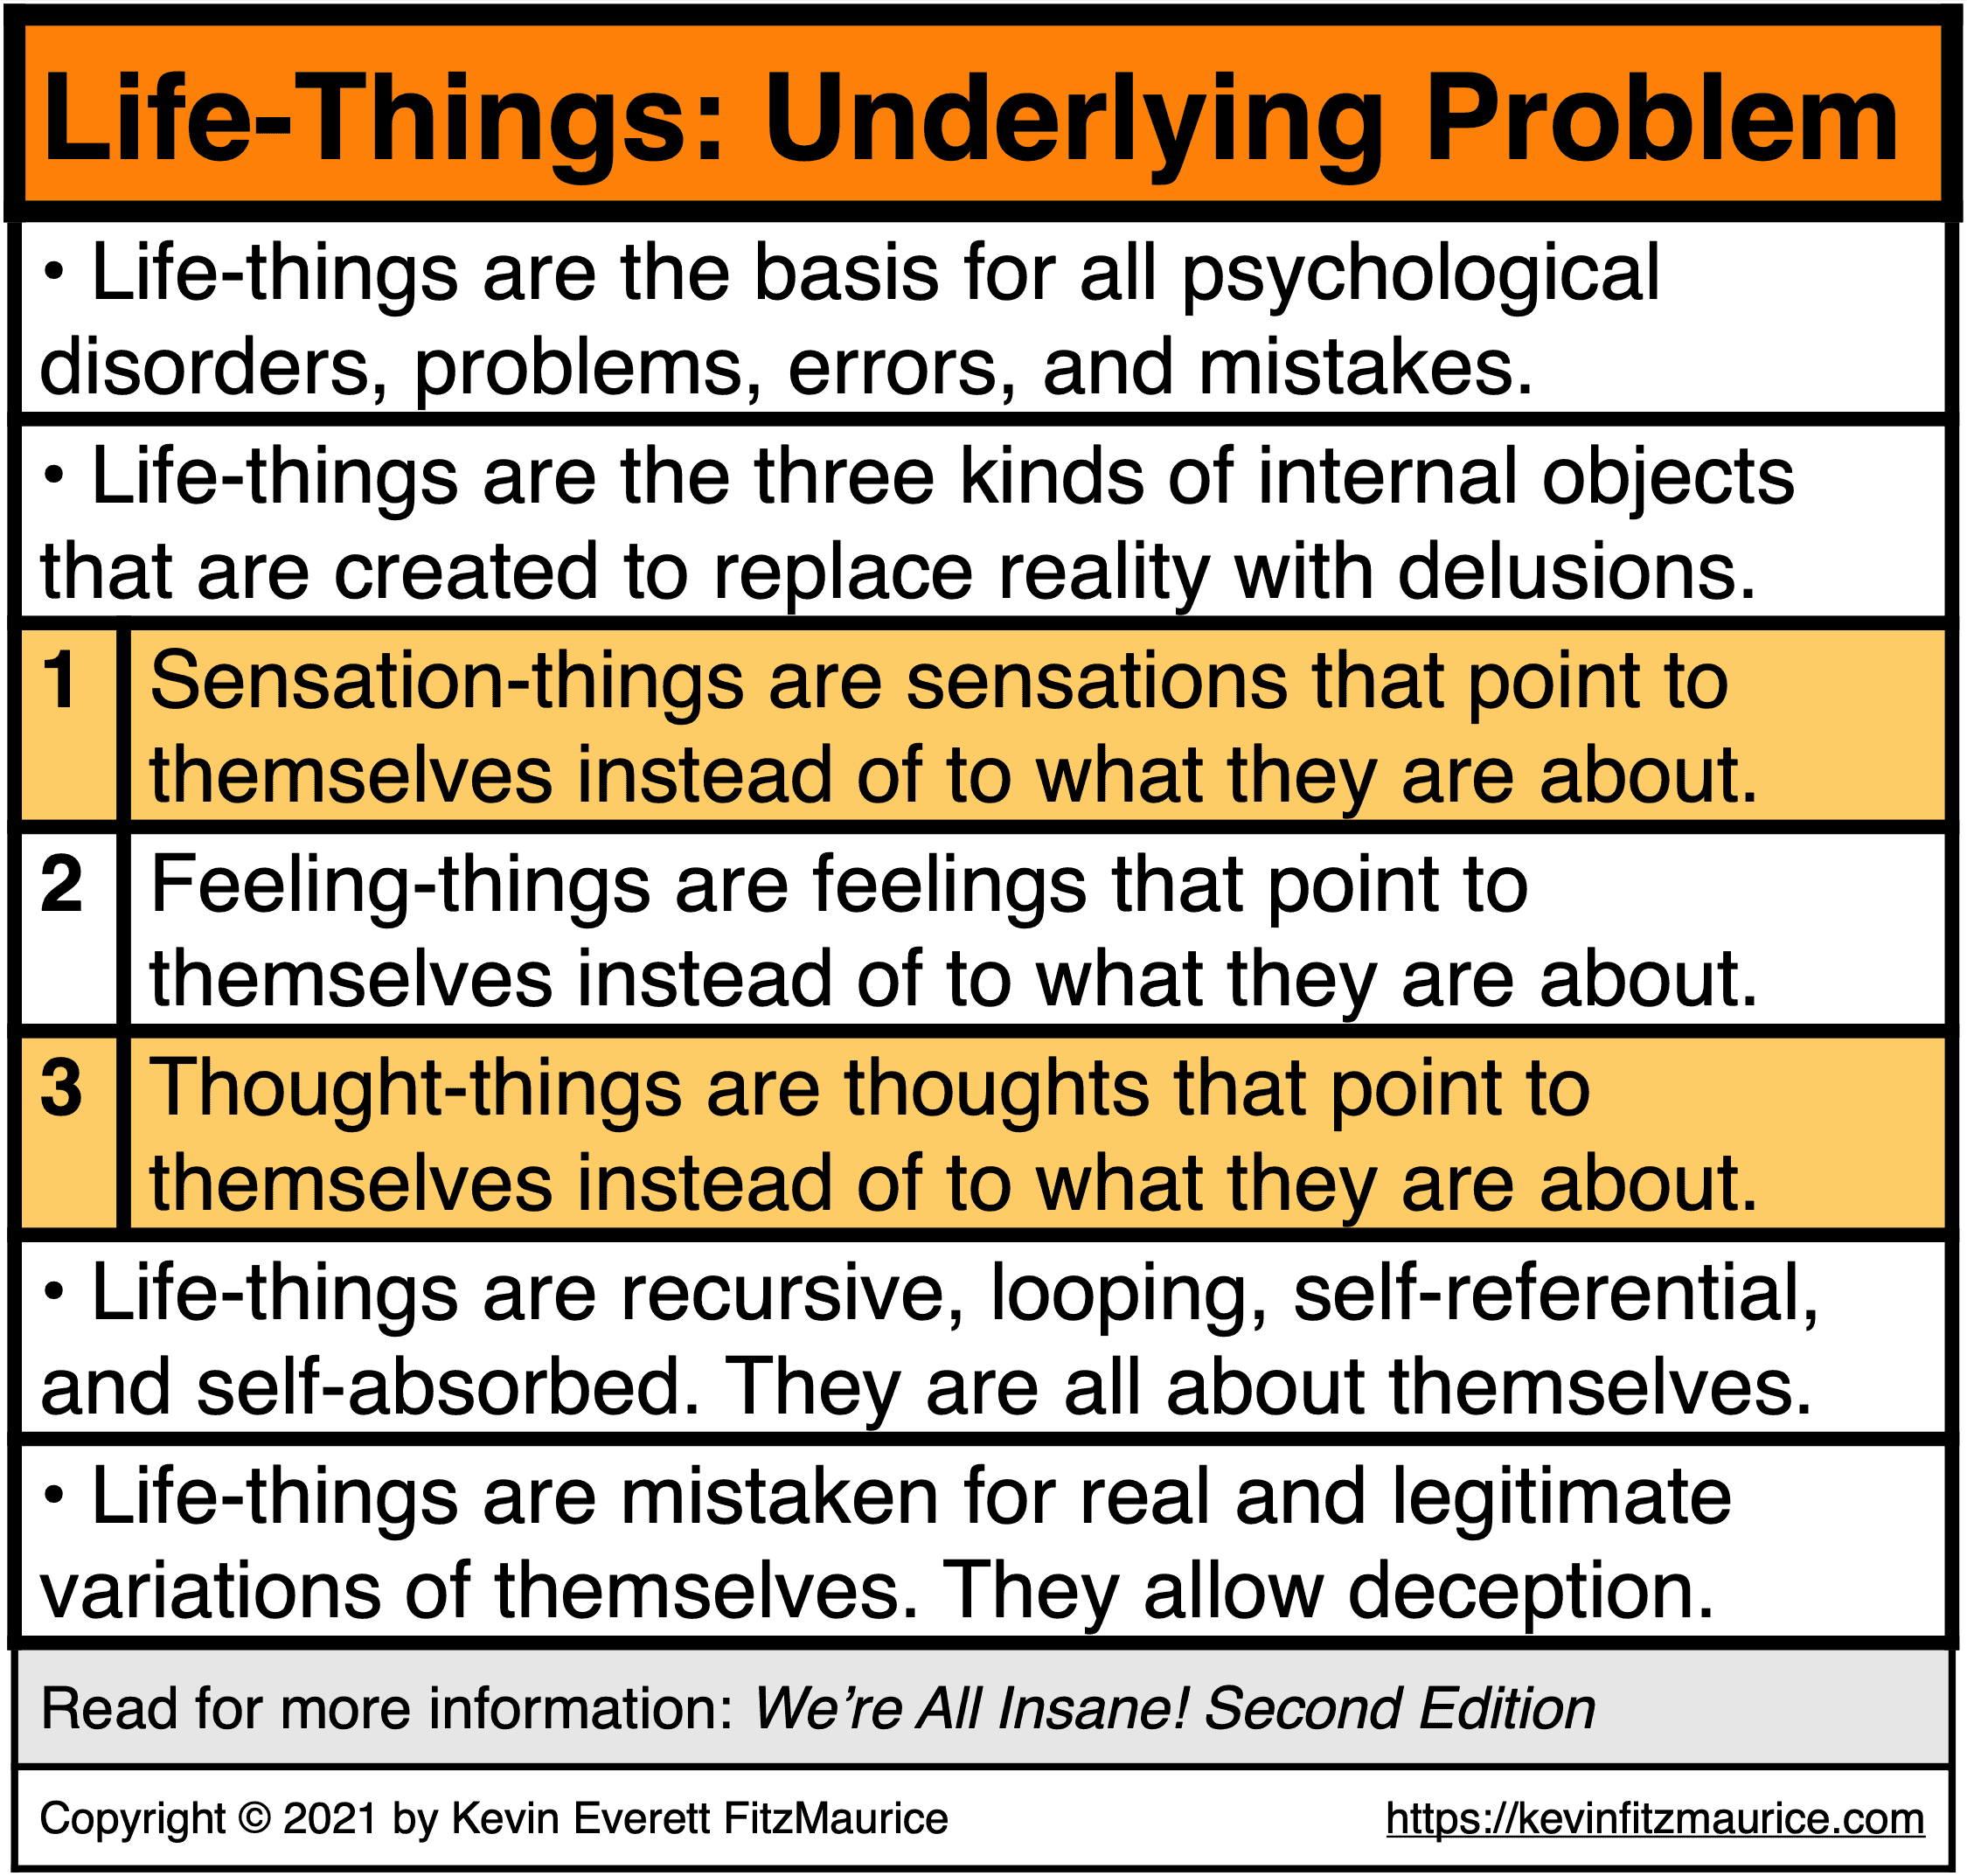 Life-Things Are the Underlying Problem